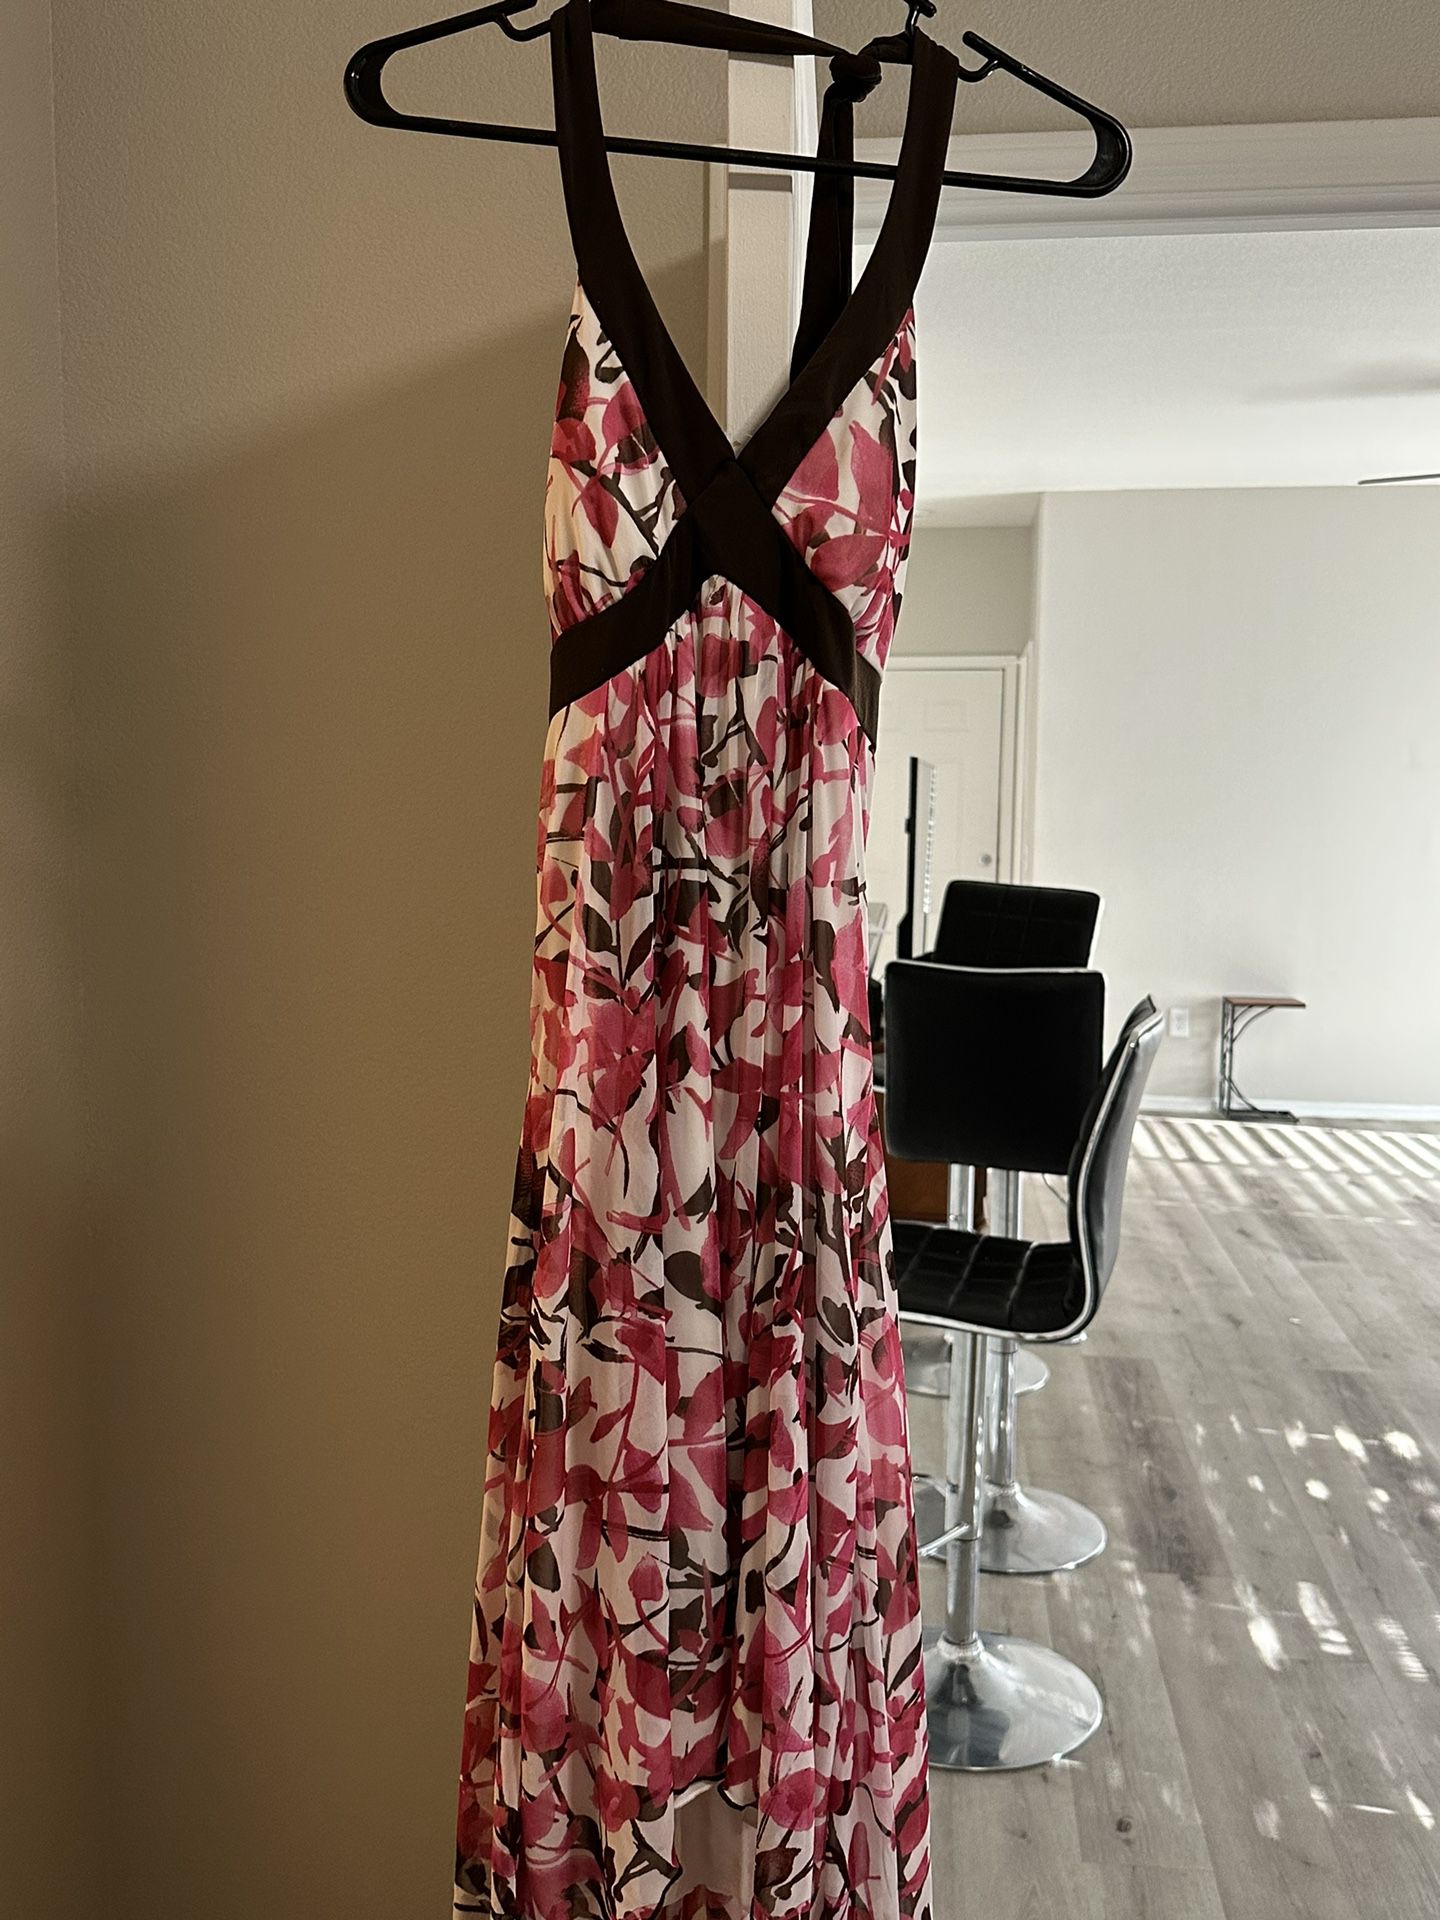 Pink ,brown And White Summer Dress Size M,brand Speechless